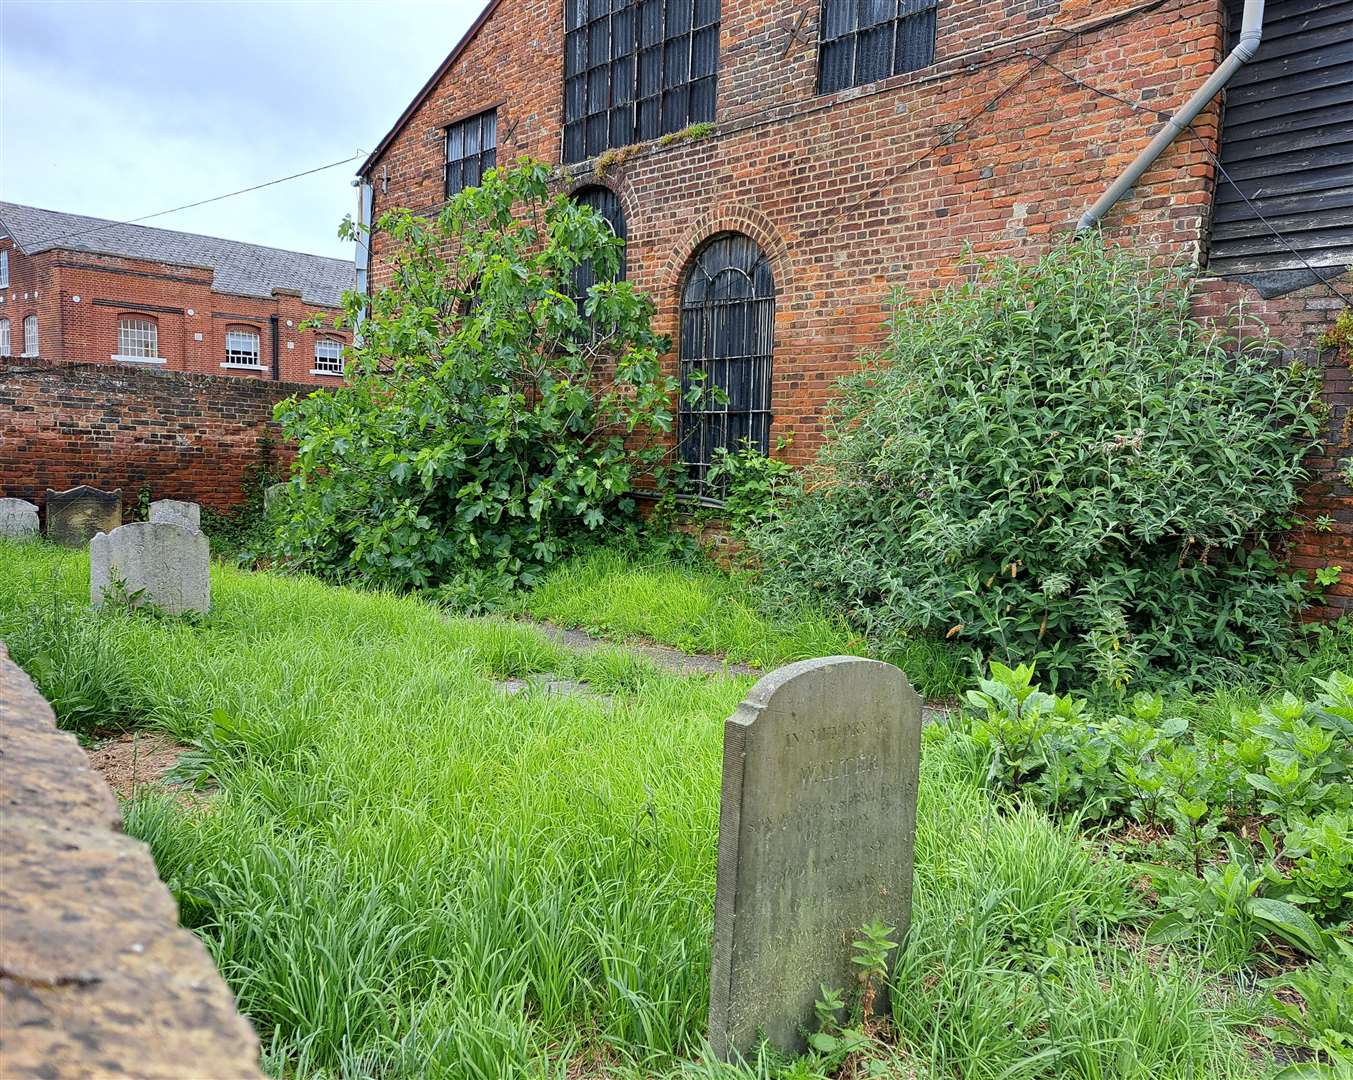 The graves in St Margaret’s churchyard, Canterbury, date back almost 200 years